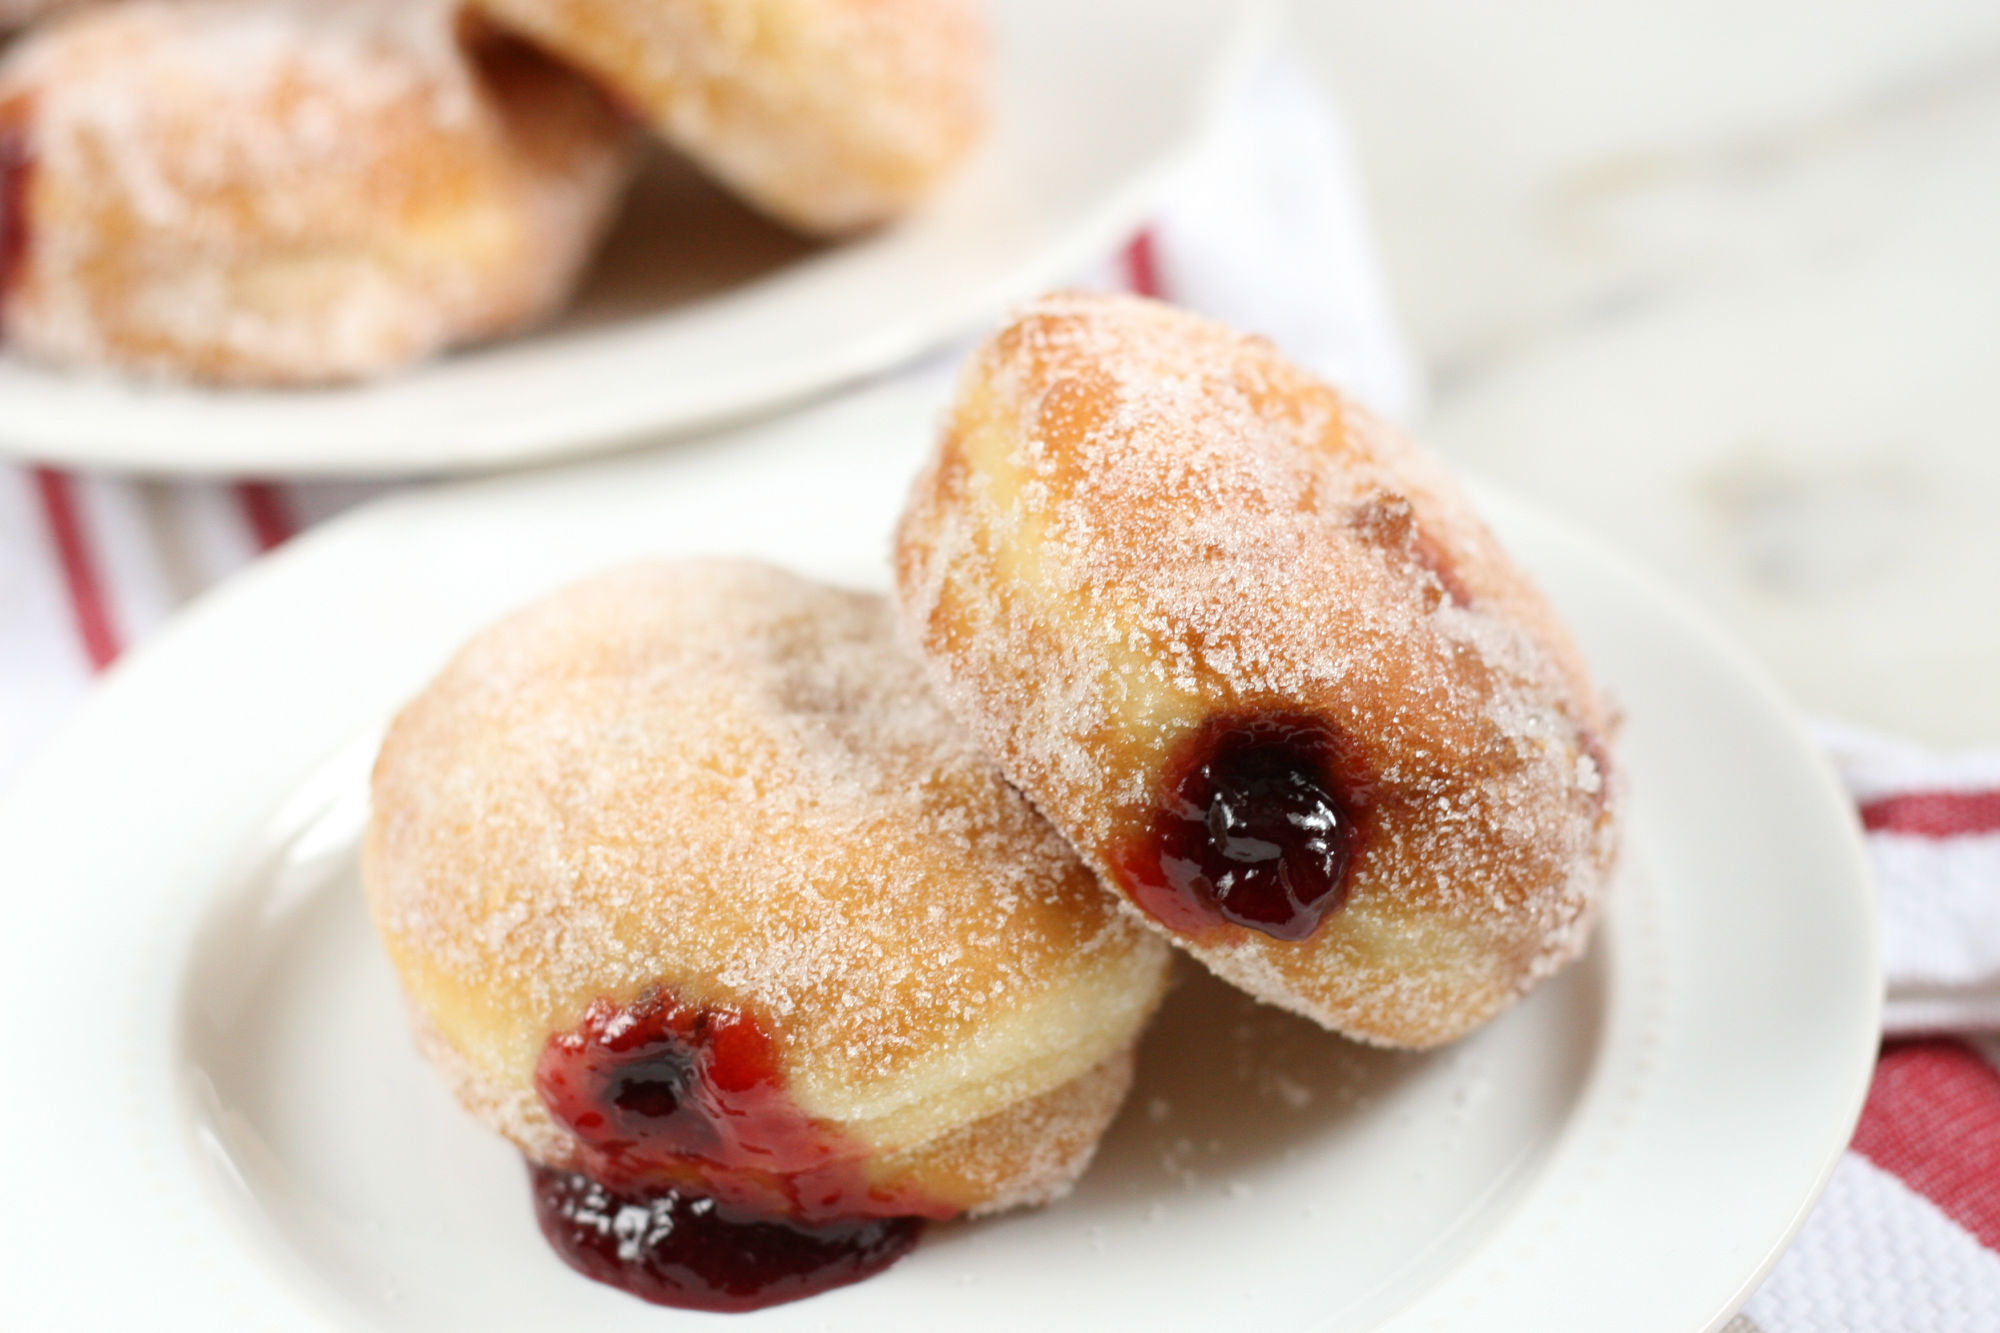 two jelly donuts dusted in sugar and filled with raspberry jam sitting on a white plate